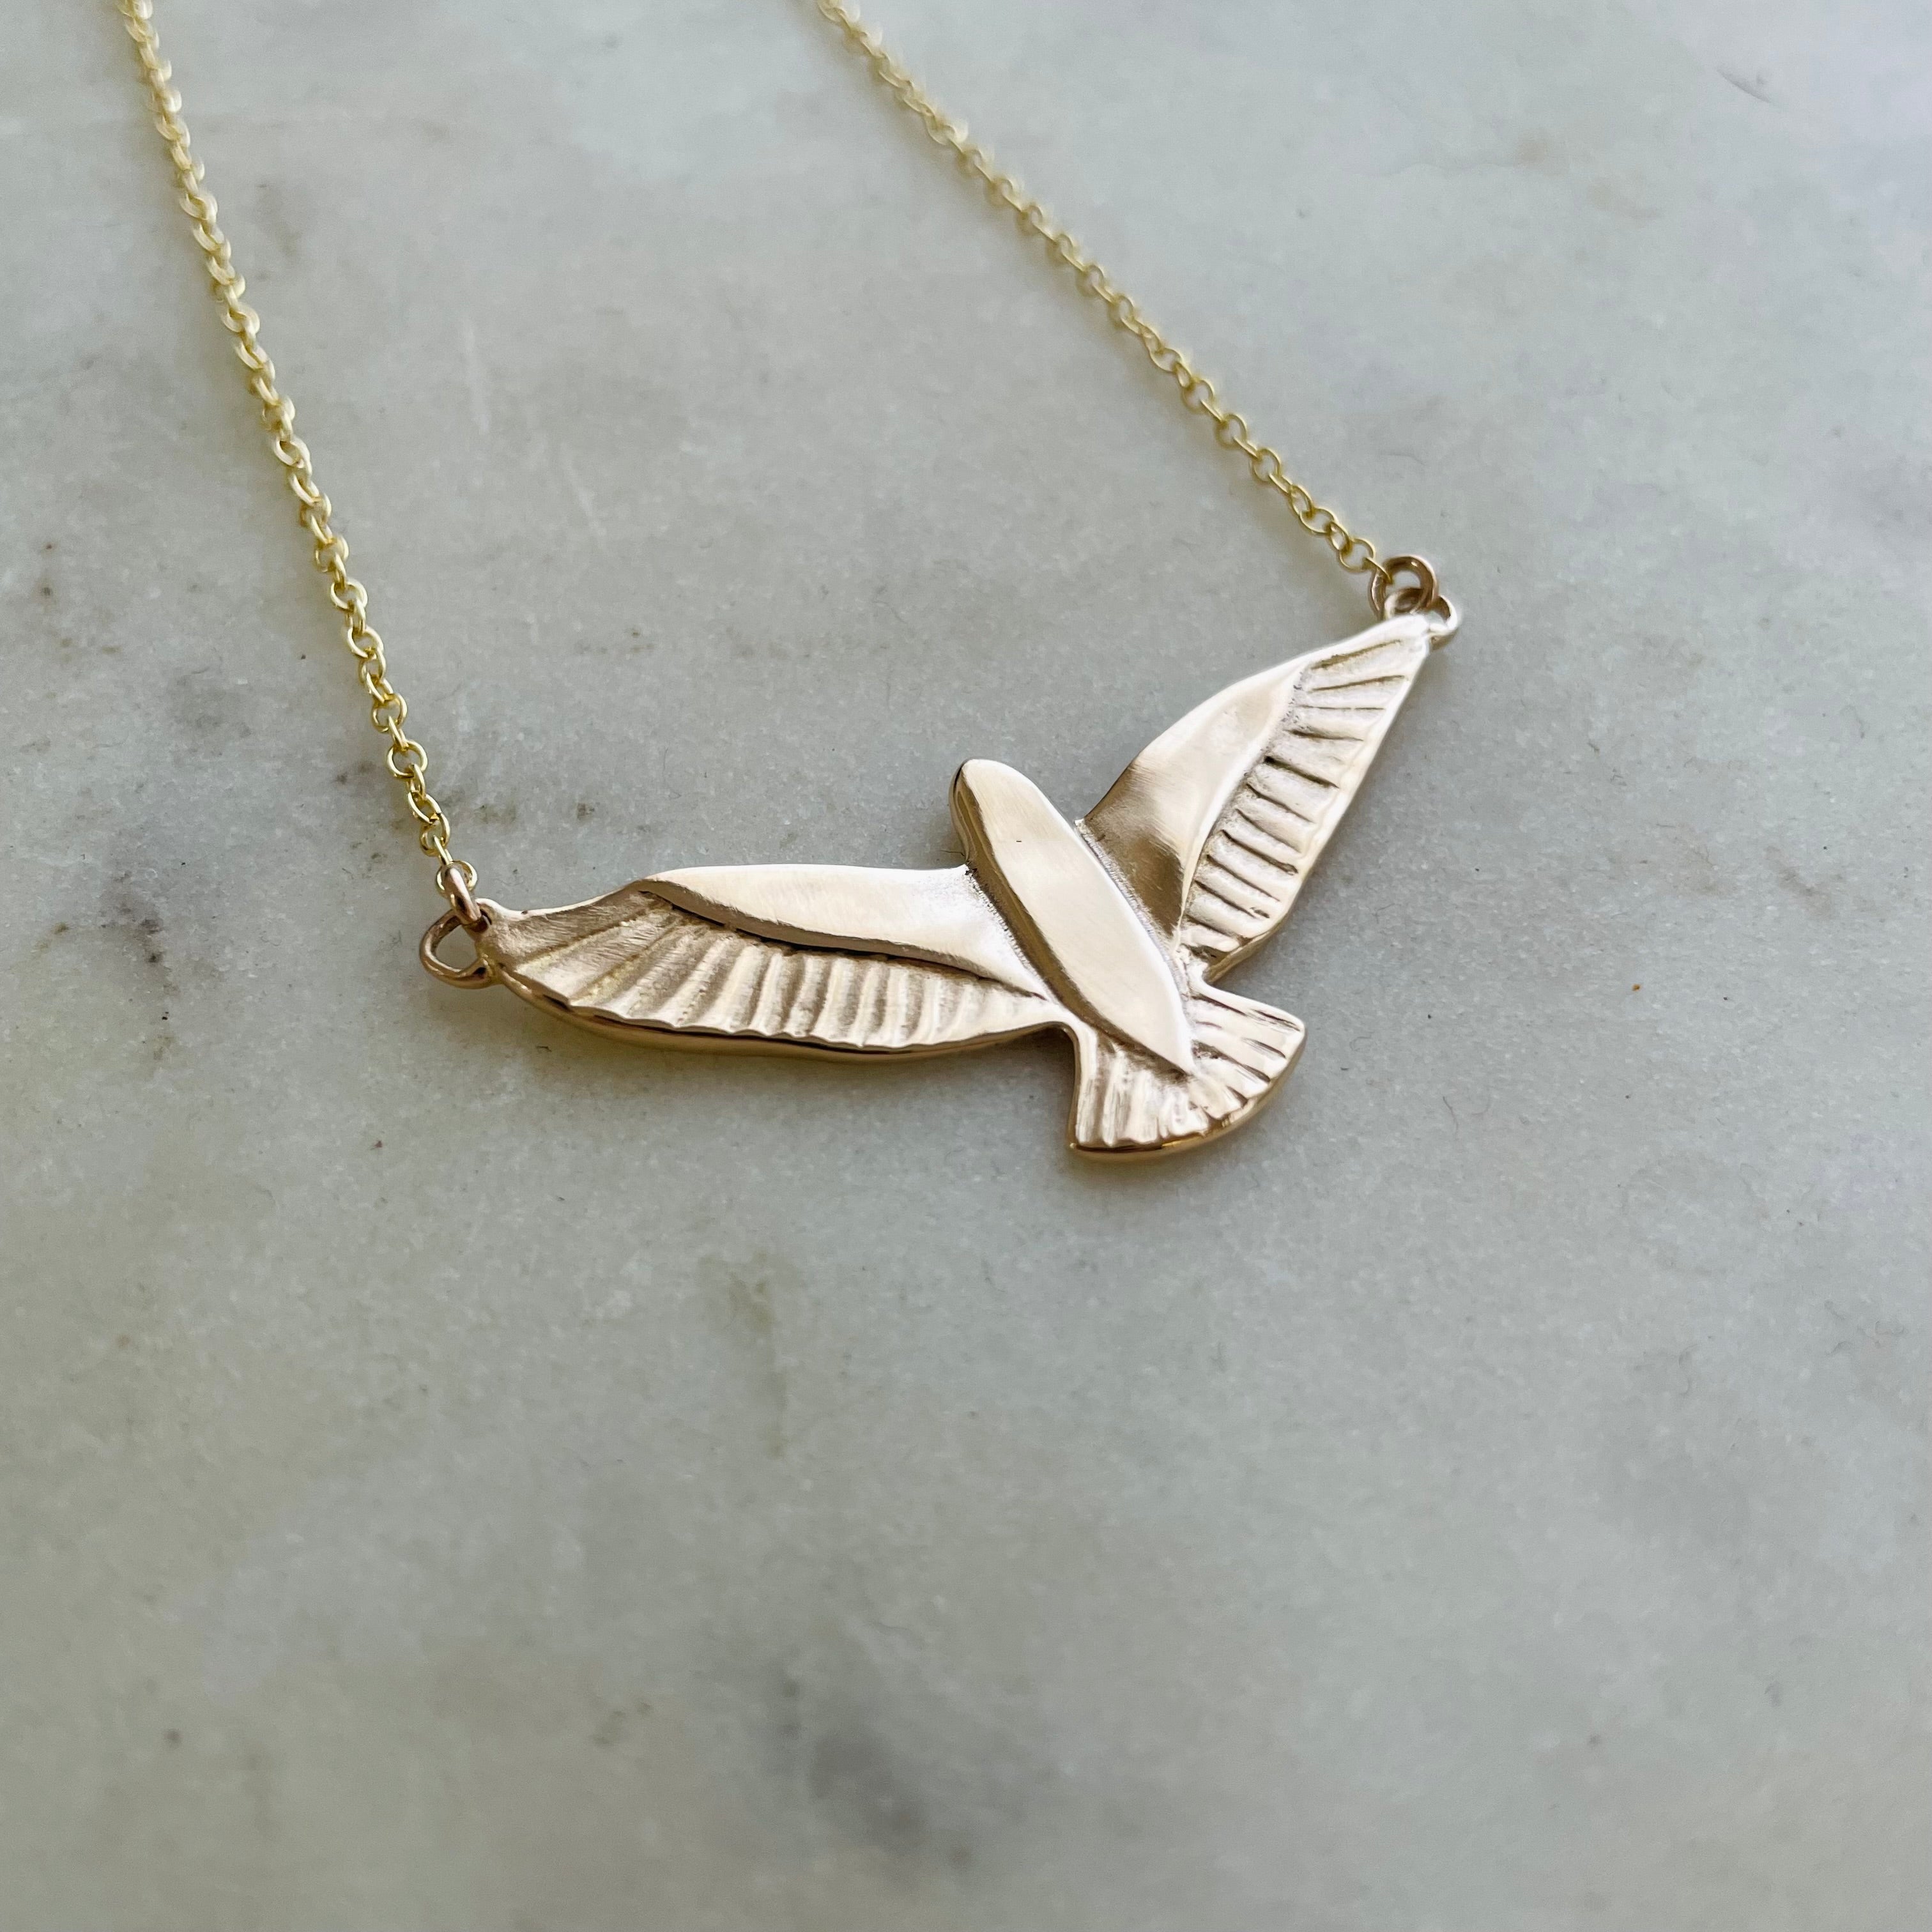 Gold Seagull Necklace, Flying Bird Necklace, Bird Charm, Bird Pendant, Gold  Bird Necklace, Gold Seagull Charm, Seagull Jewelry, Bird Jewelry - Etsy |  Bird charm, Bird pendant, Woodland jewelry